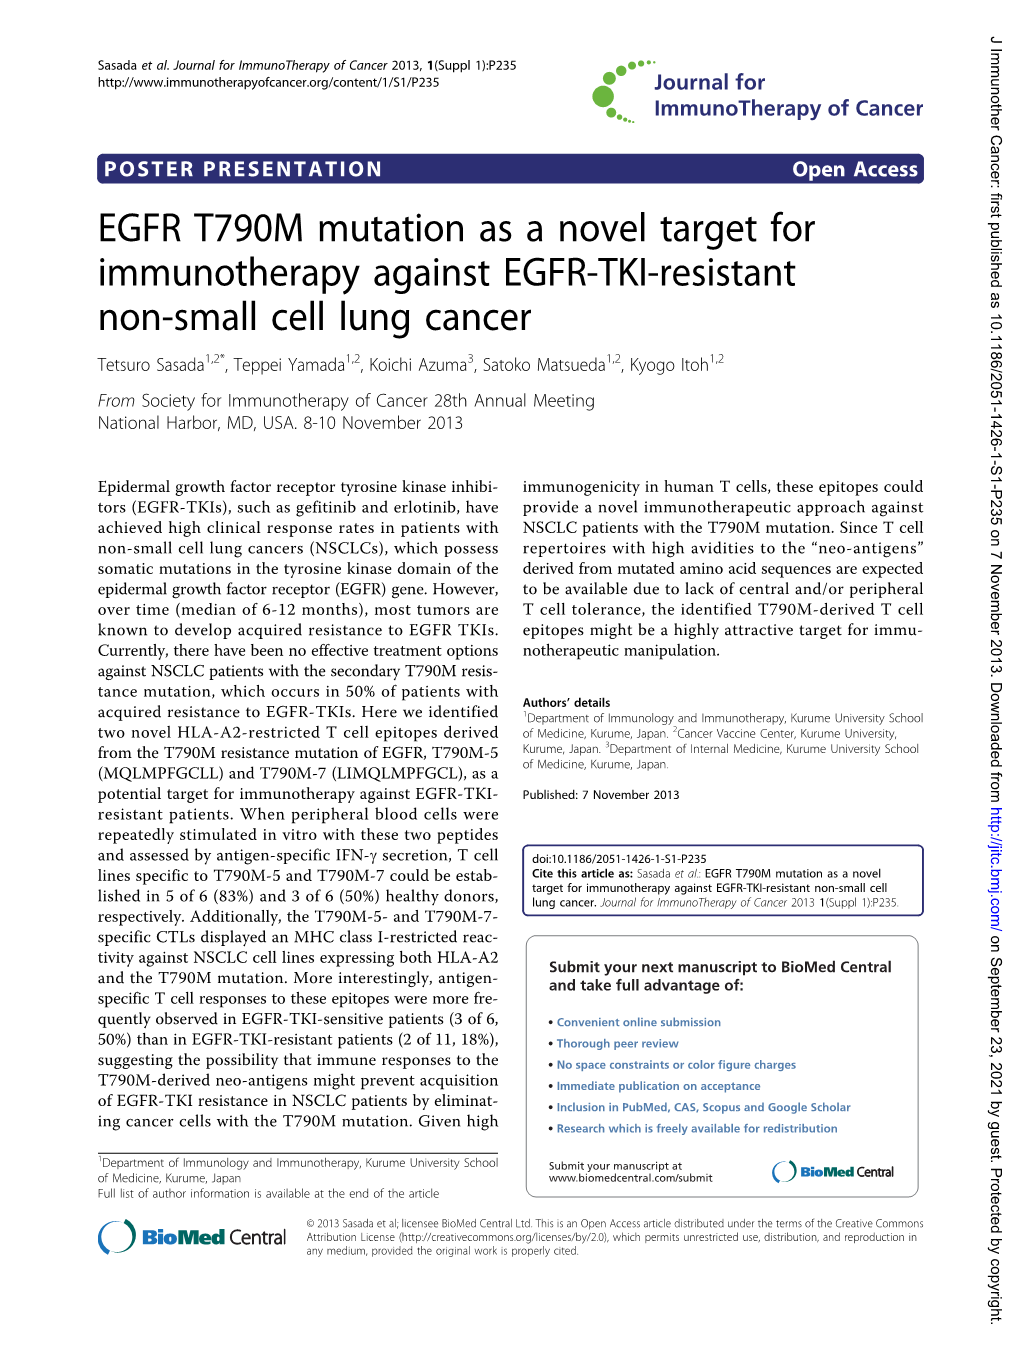 EGFR T790M Mutation As a Novel Target for Immunotherapy Against